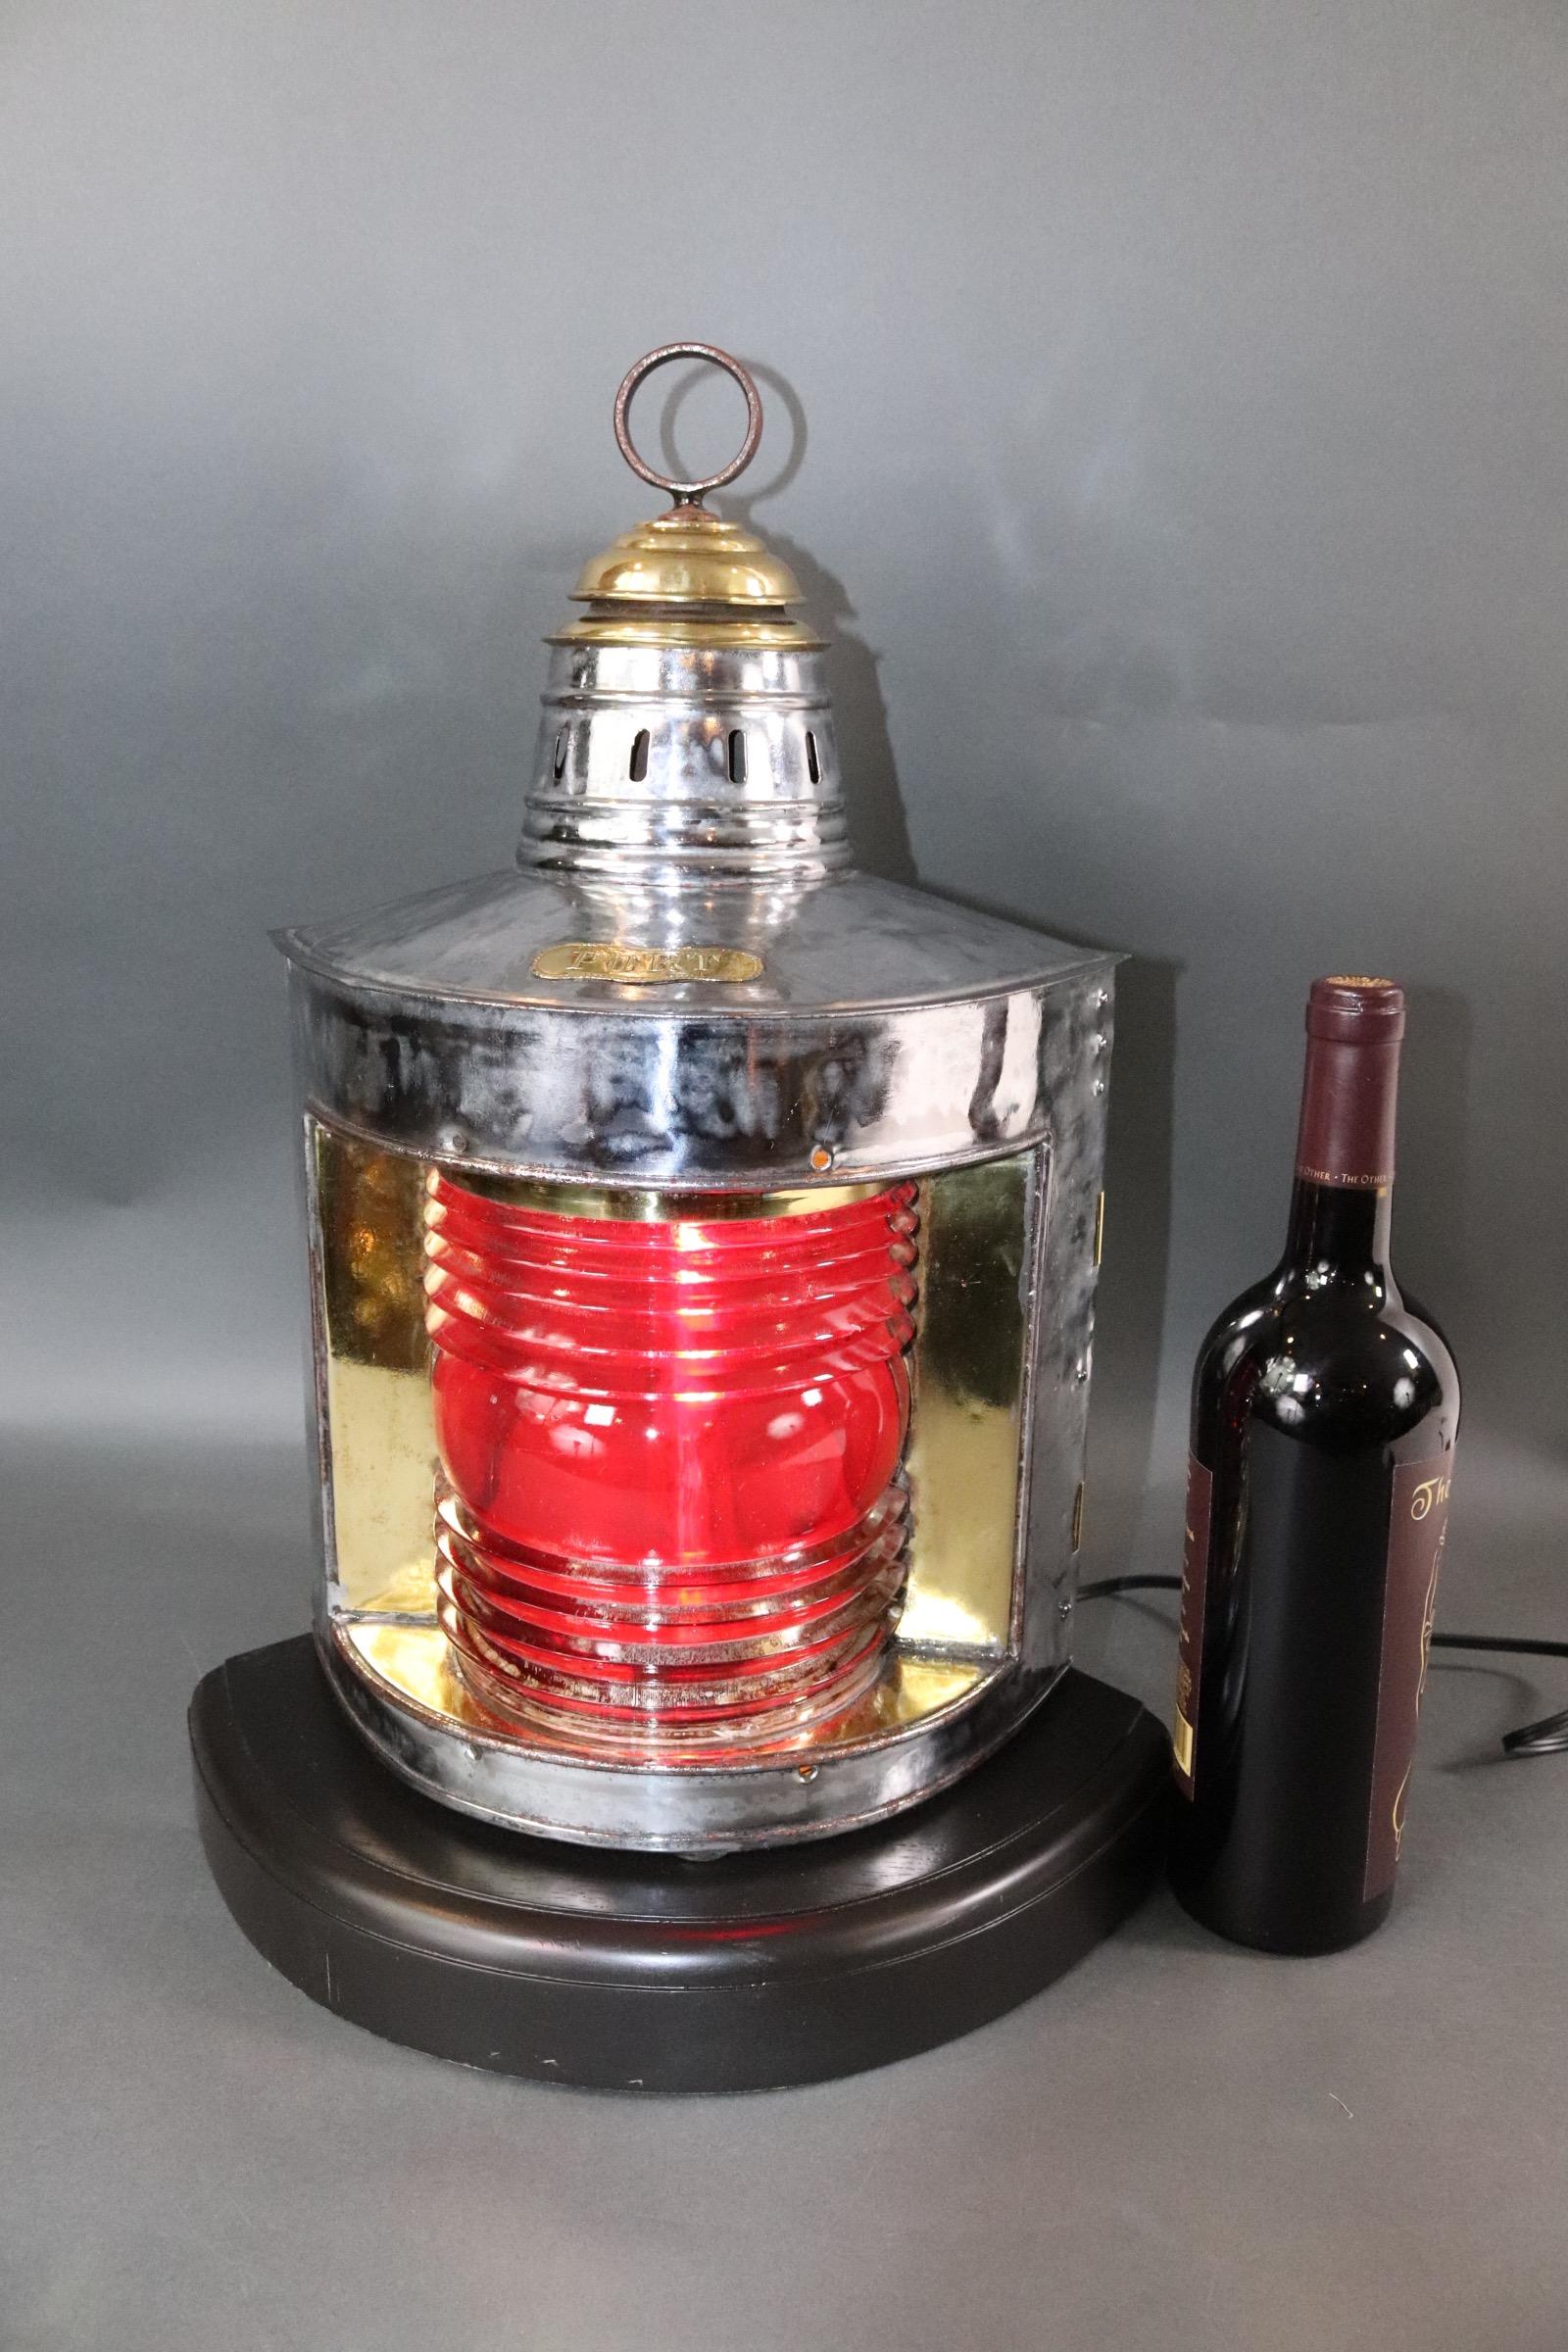 Polished steel and brass ships lantern with red Fresnel glass lens. Mounted to a custom made thick mahogany base with dark finish. With makers badge from J.Barre & Co. manufacturers 25 Fulton & 204 Water St N.Y. Hinged rear door, interior is fitted